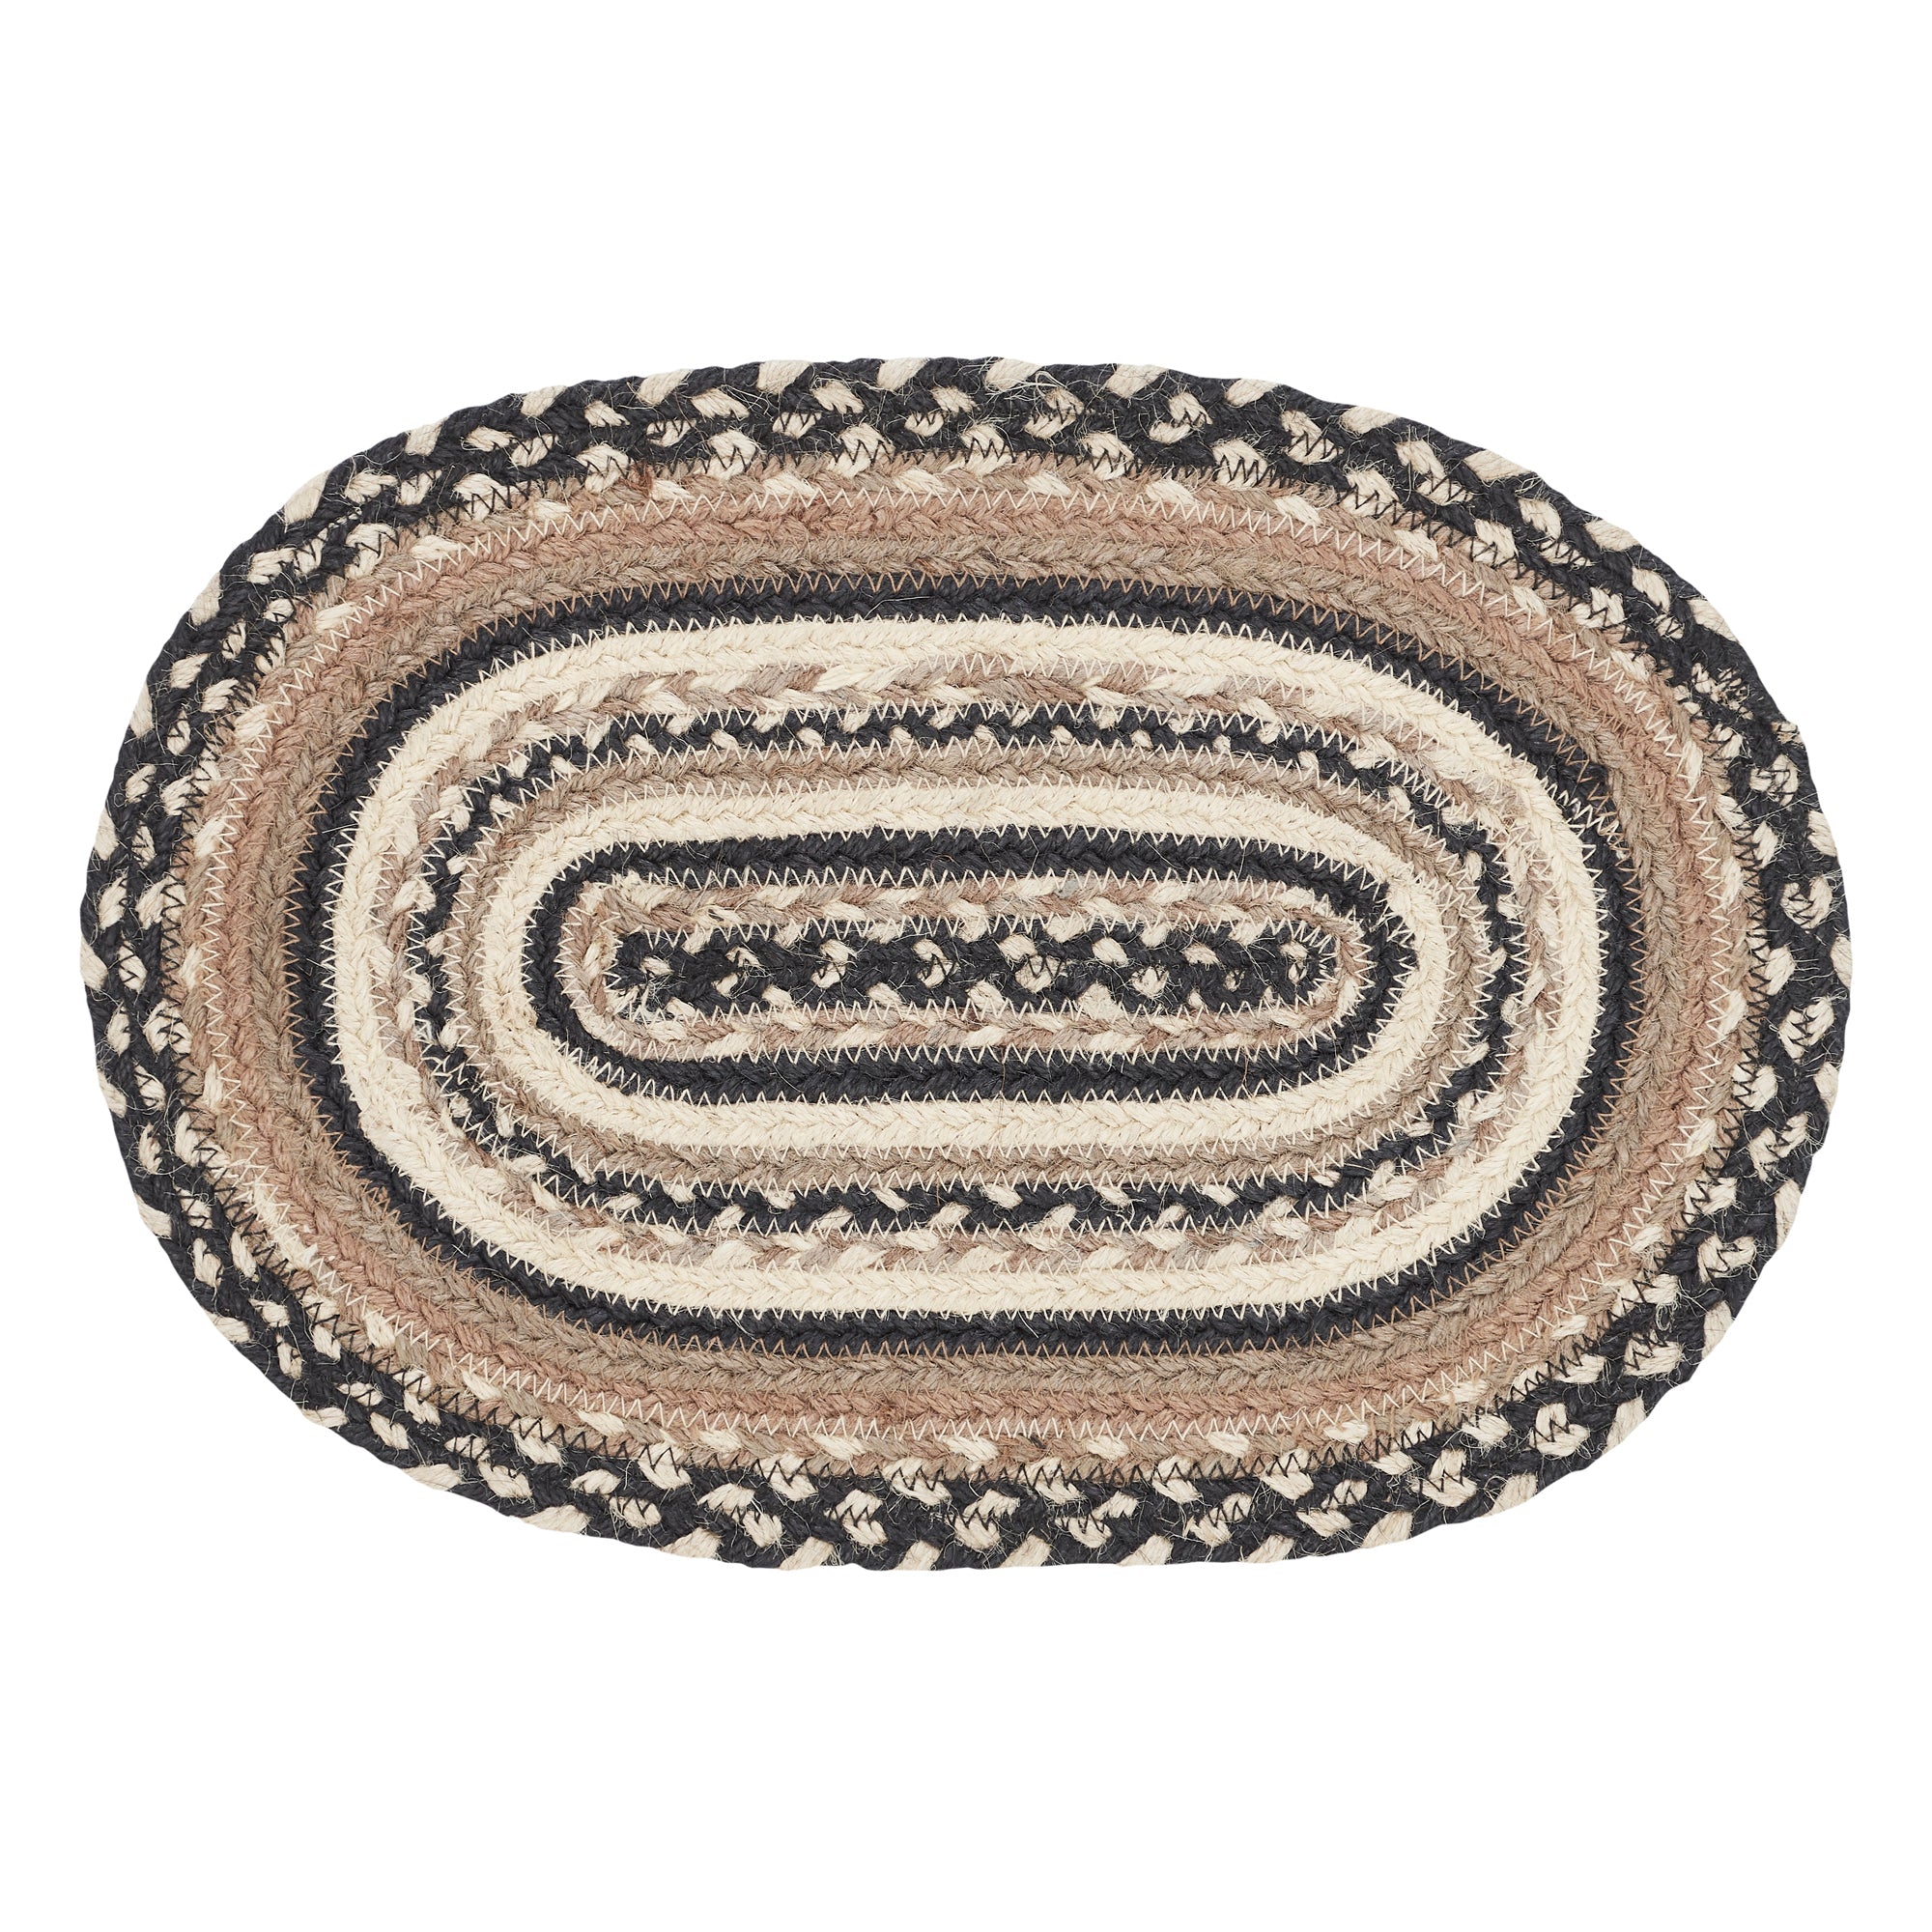 Sawyer Mill Charcoal Creme Jute Braided Oval Placemat 10"x15" VHC Brands